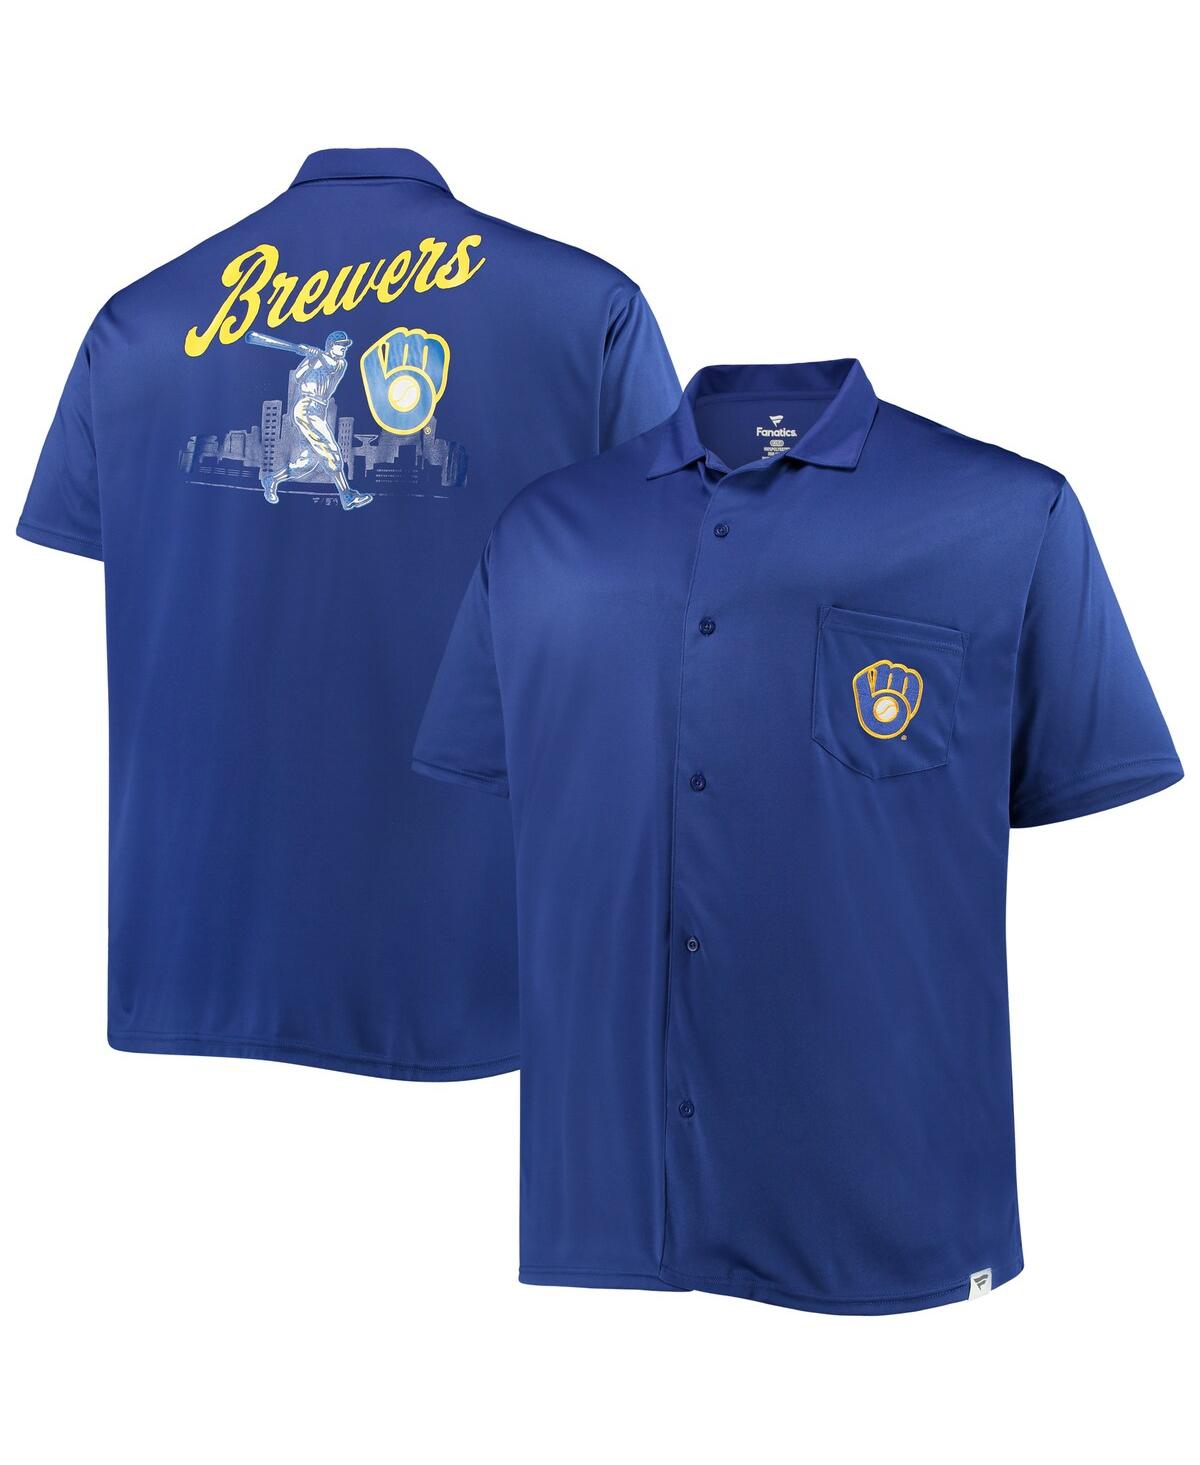 PROFILE MEN'S ROYAL MILWAUKEE BREWERS BIG AND TALL BUTTON-UP SHIRT